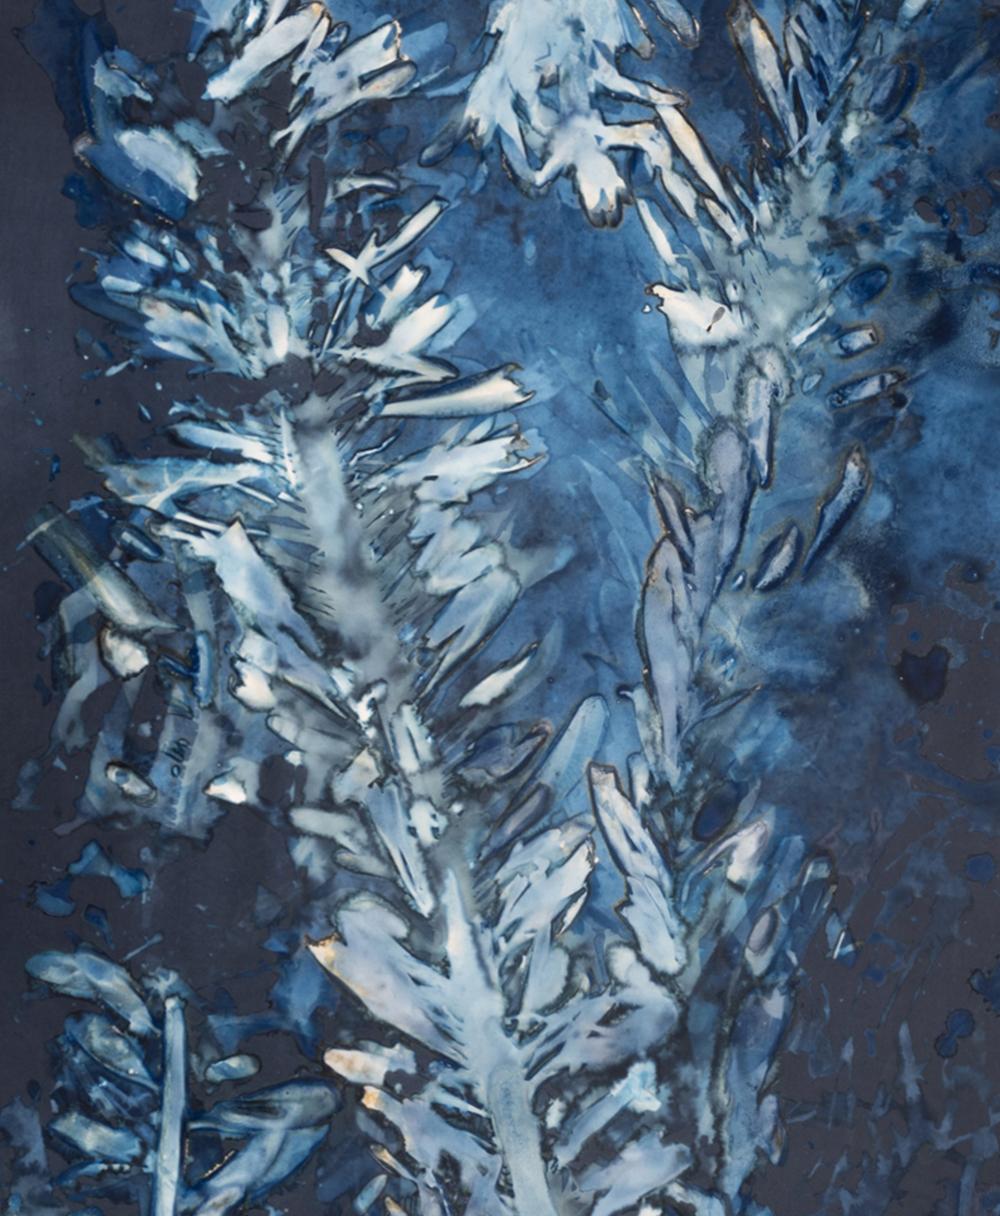 Laminariales XVIII. From the series Bosque Cyanotype photograph - Blue Abstract Photograph by Paola Davila